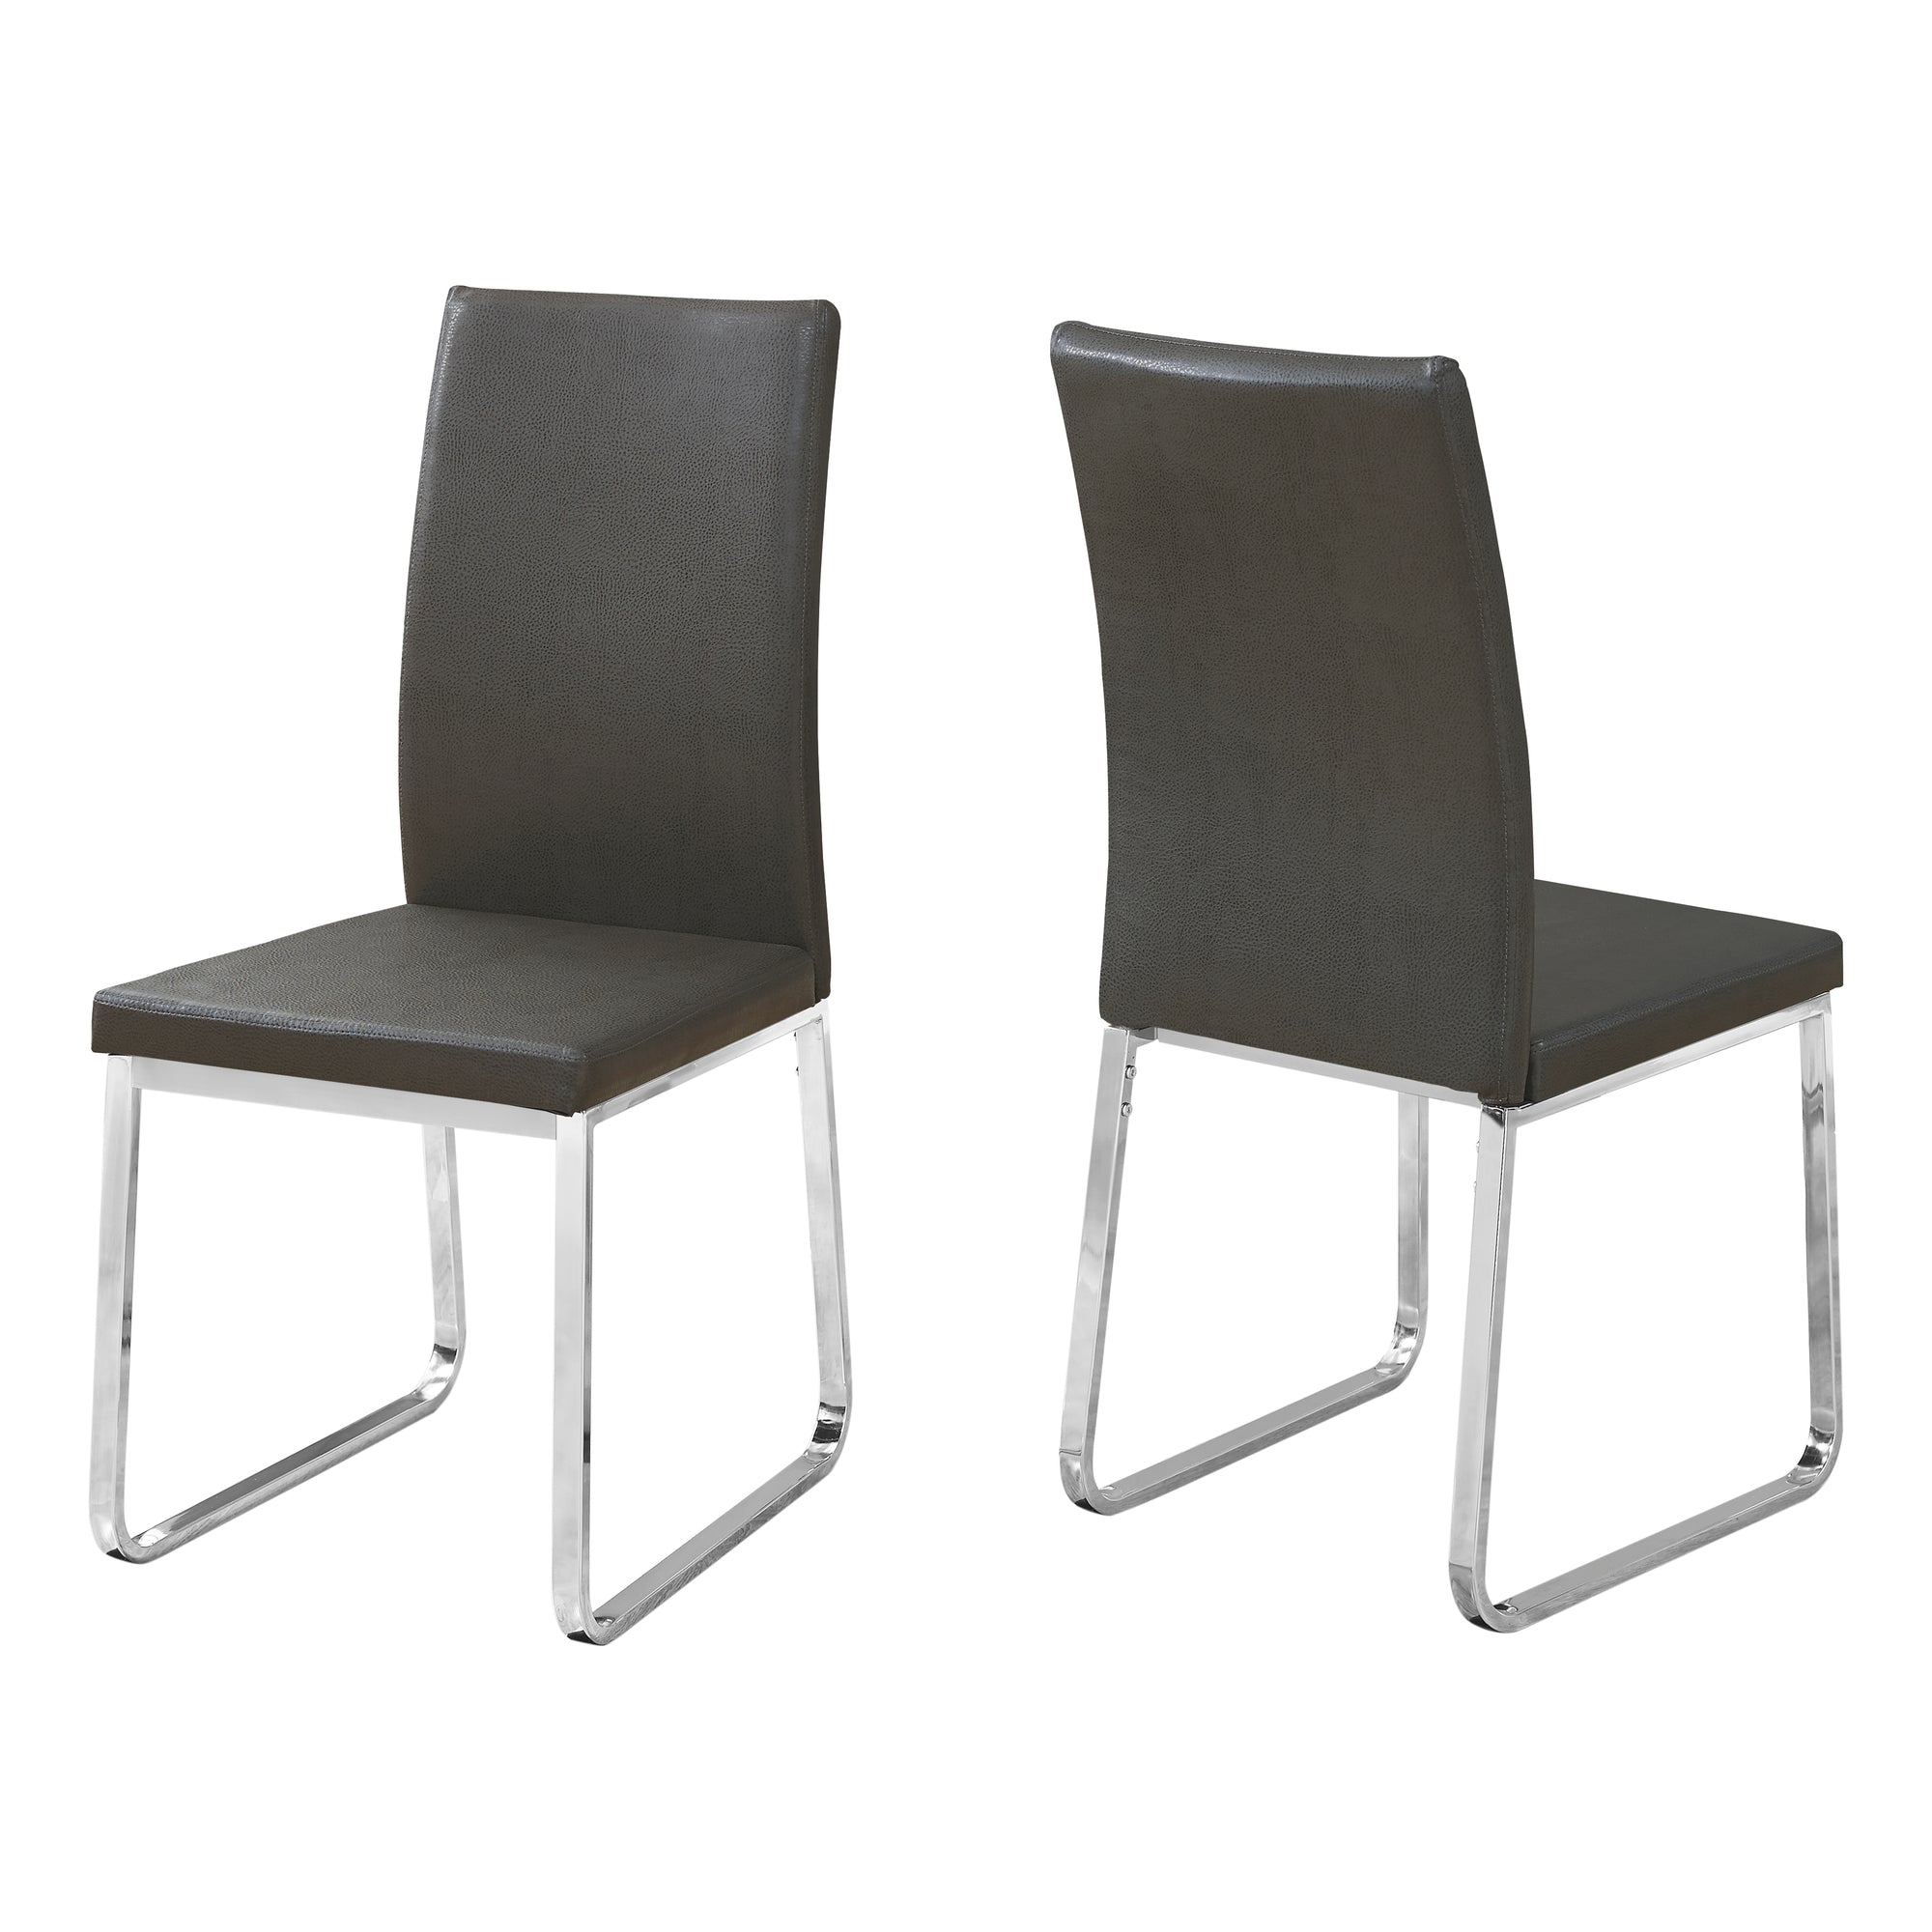 MN-491094    Dining Chair, Set Of 2, Side, Pu Leather-Look, Upholstered, Metal Legs, Kitchen, Dining Room, Leather Look, Metal Legs, Grey, Chrome, Contemporary, Modern